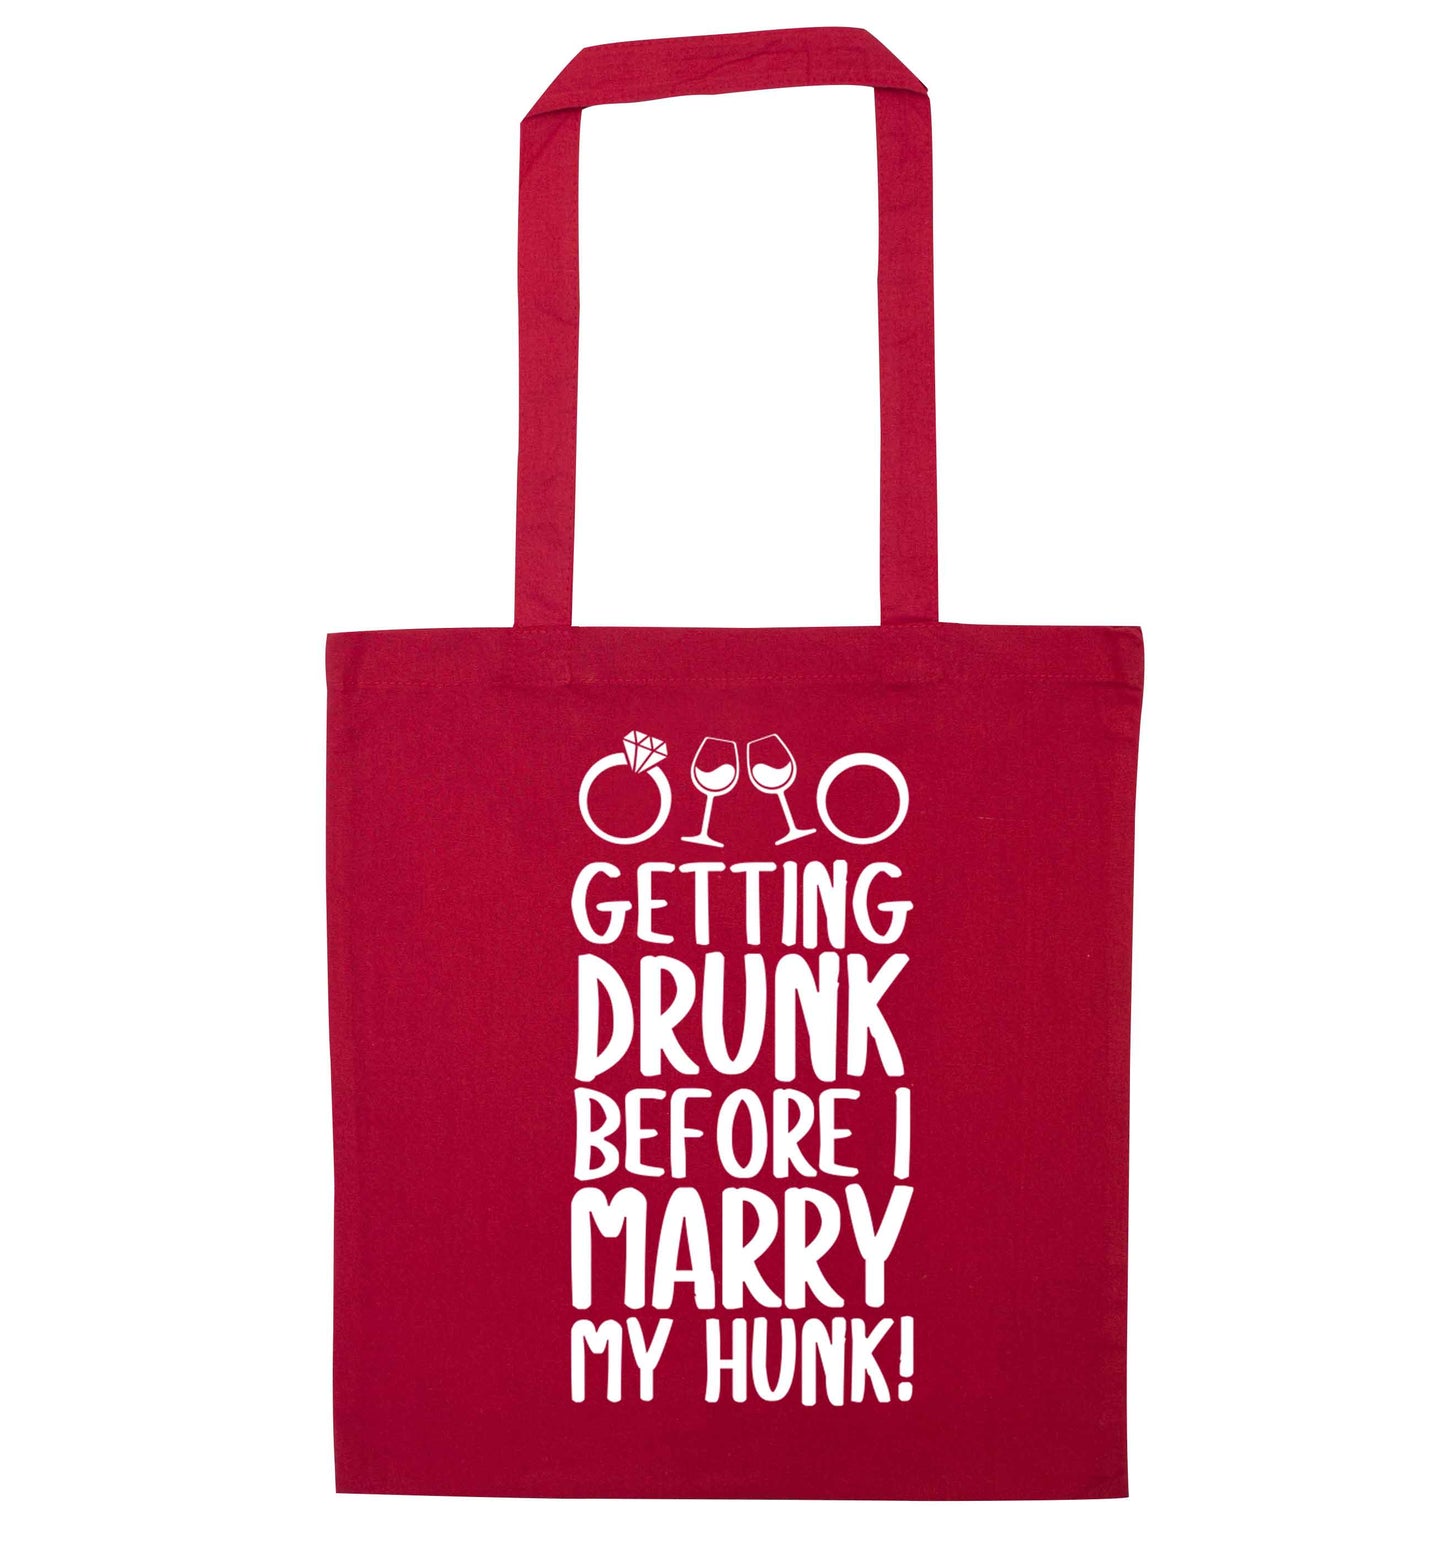 Getting drunk before I marry my hunk red tote bag